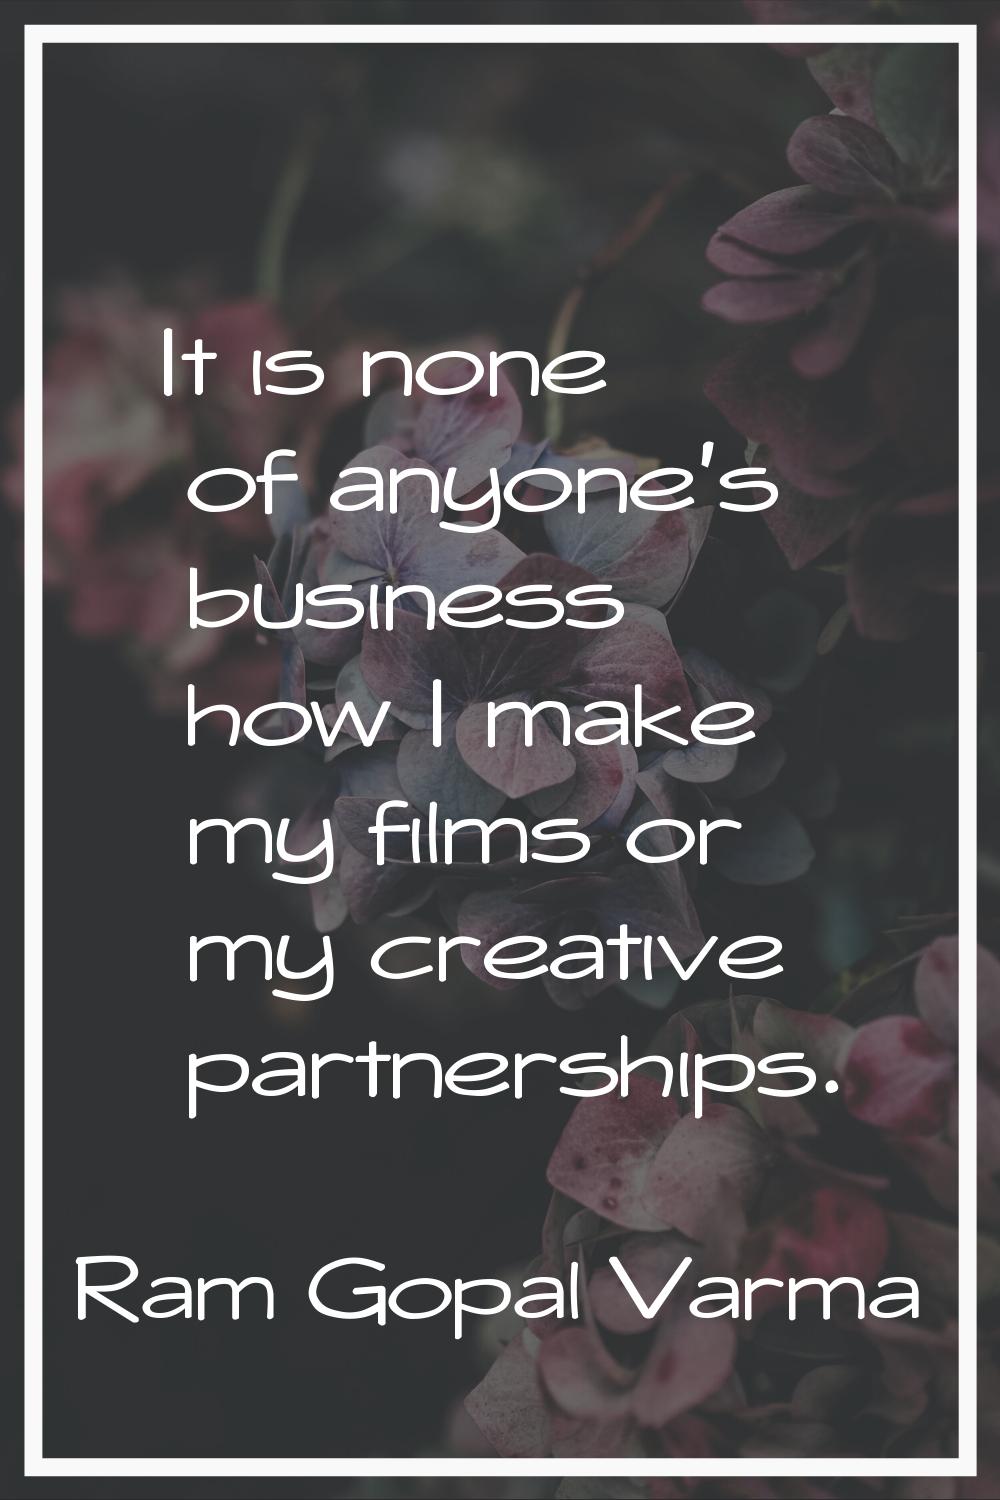 It is none of anyone's business how I make my films or my creative partnerships.